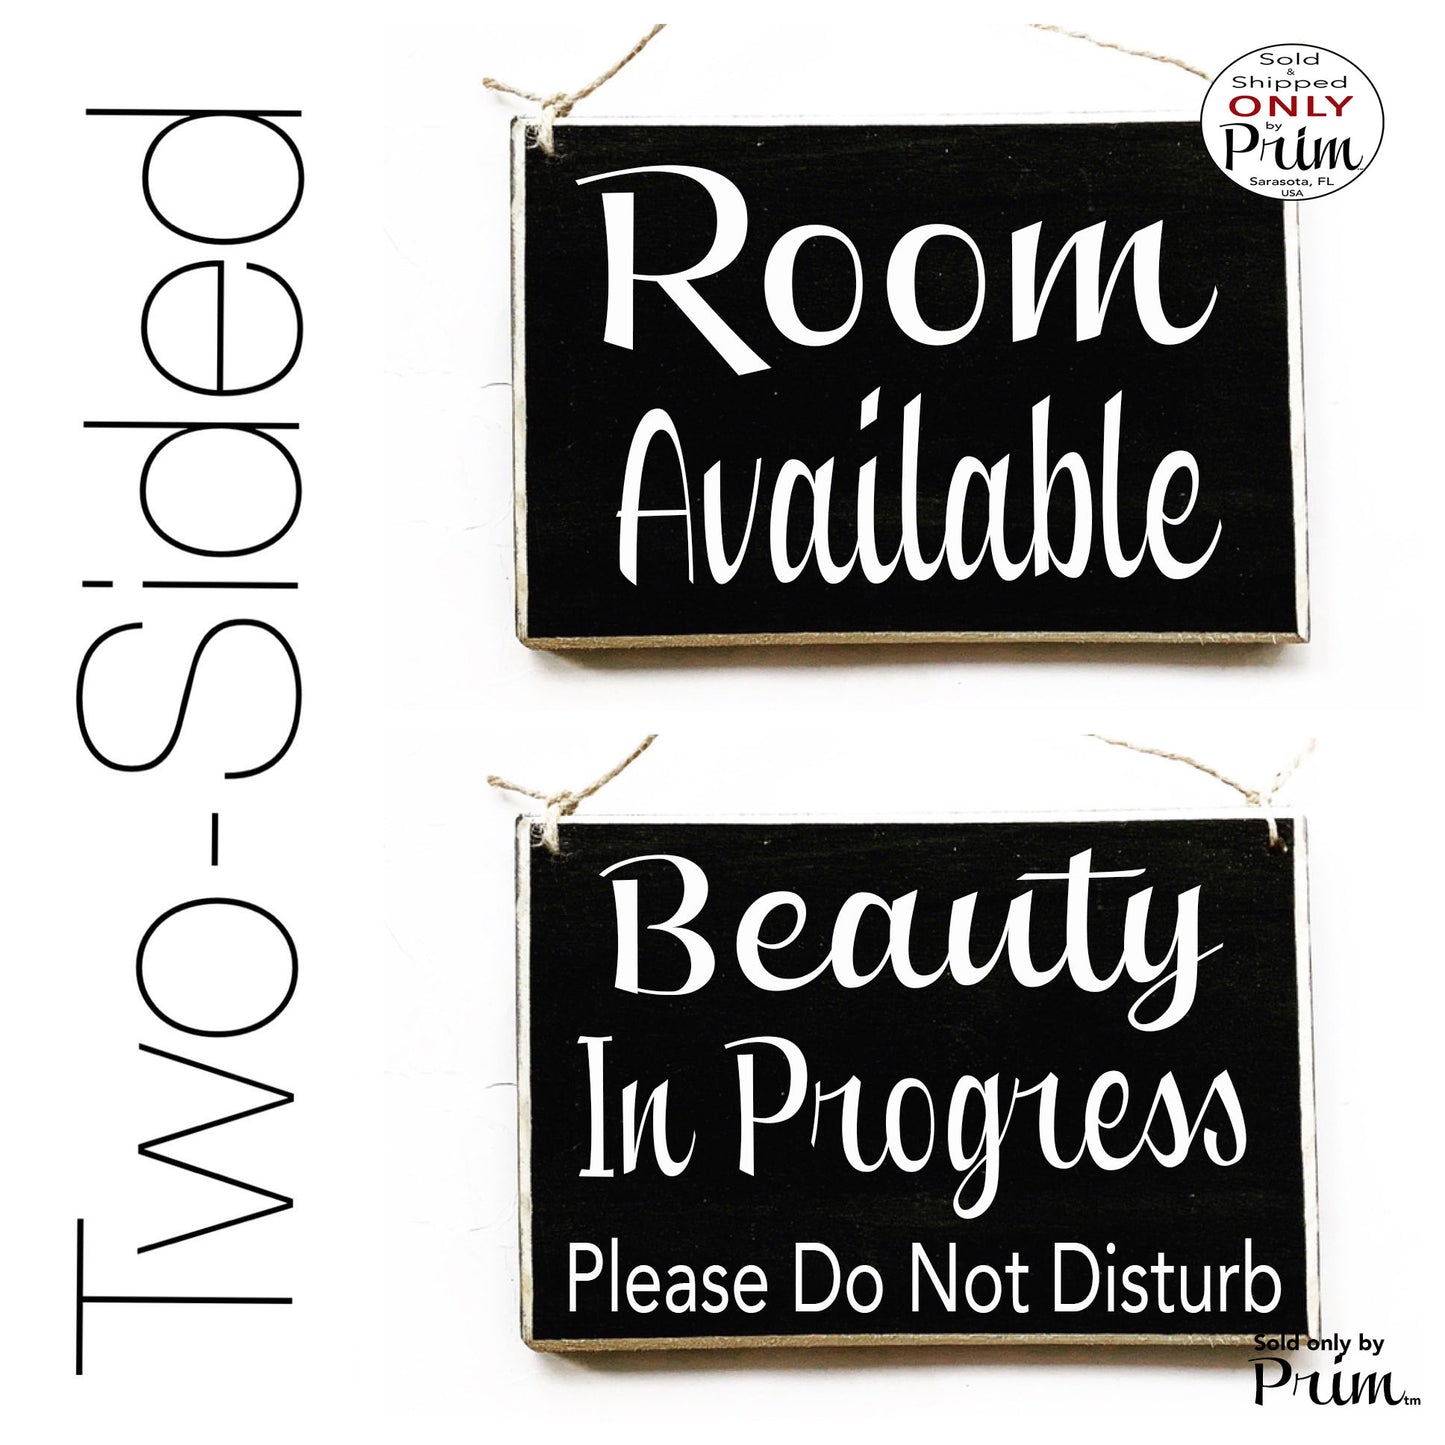 8x6 Room Available Beauty In Progress Please Do Not Disturb Custom Wood Sign Spa Salon Office Business No Entry Privacy Session Door Plaque Designs by Prim